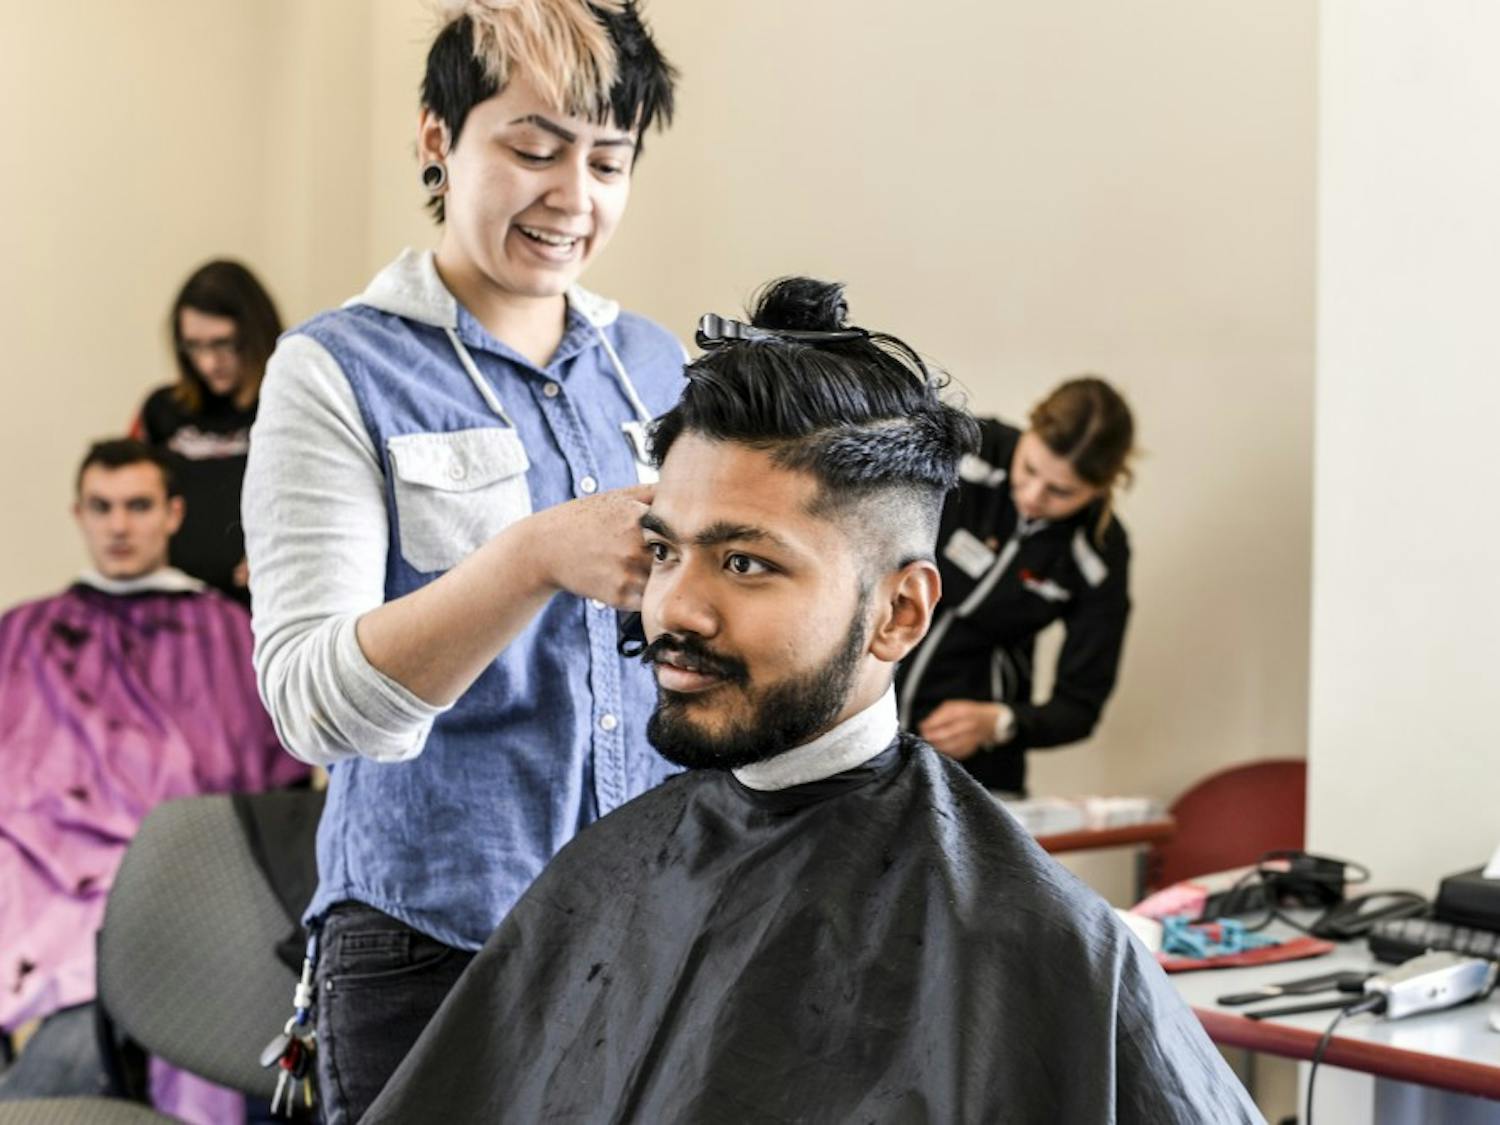 Shulav Rawal sits to get a free haircut on April 13, 2018 during the Shear Empowerment event to raise awareness for and pledge to end sexual assault on campus.